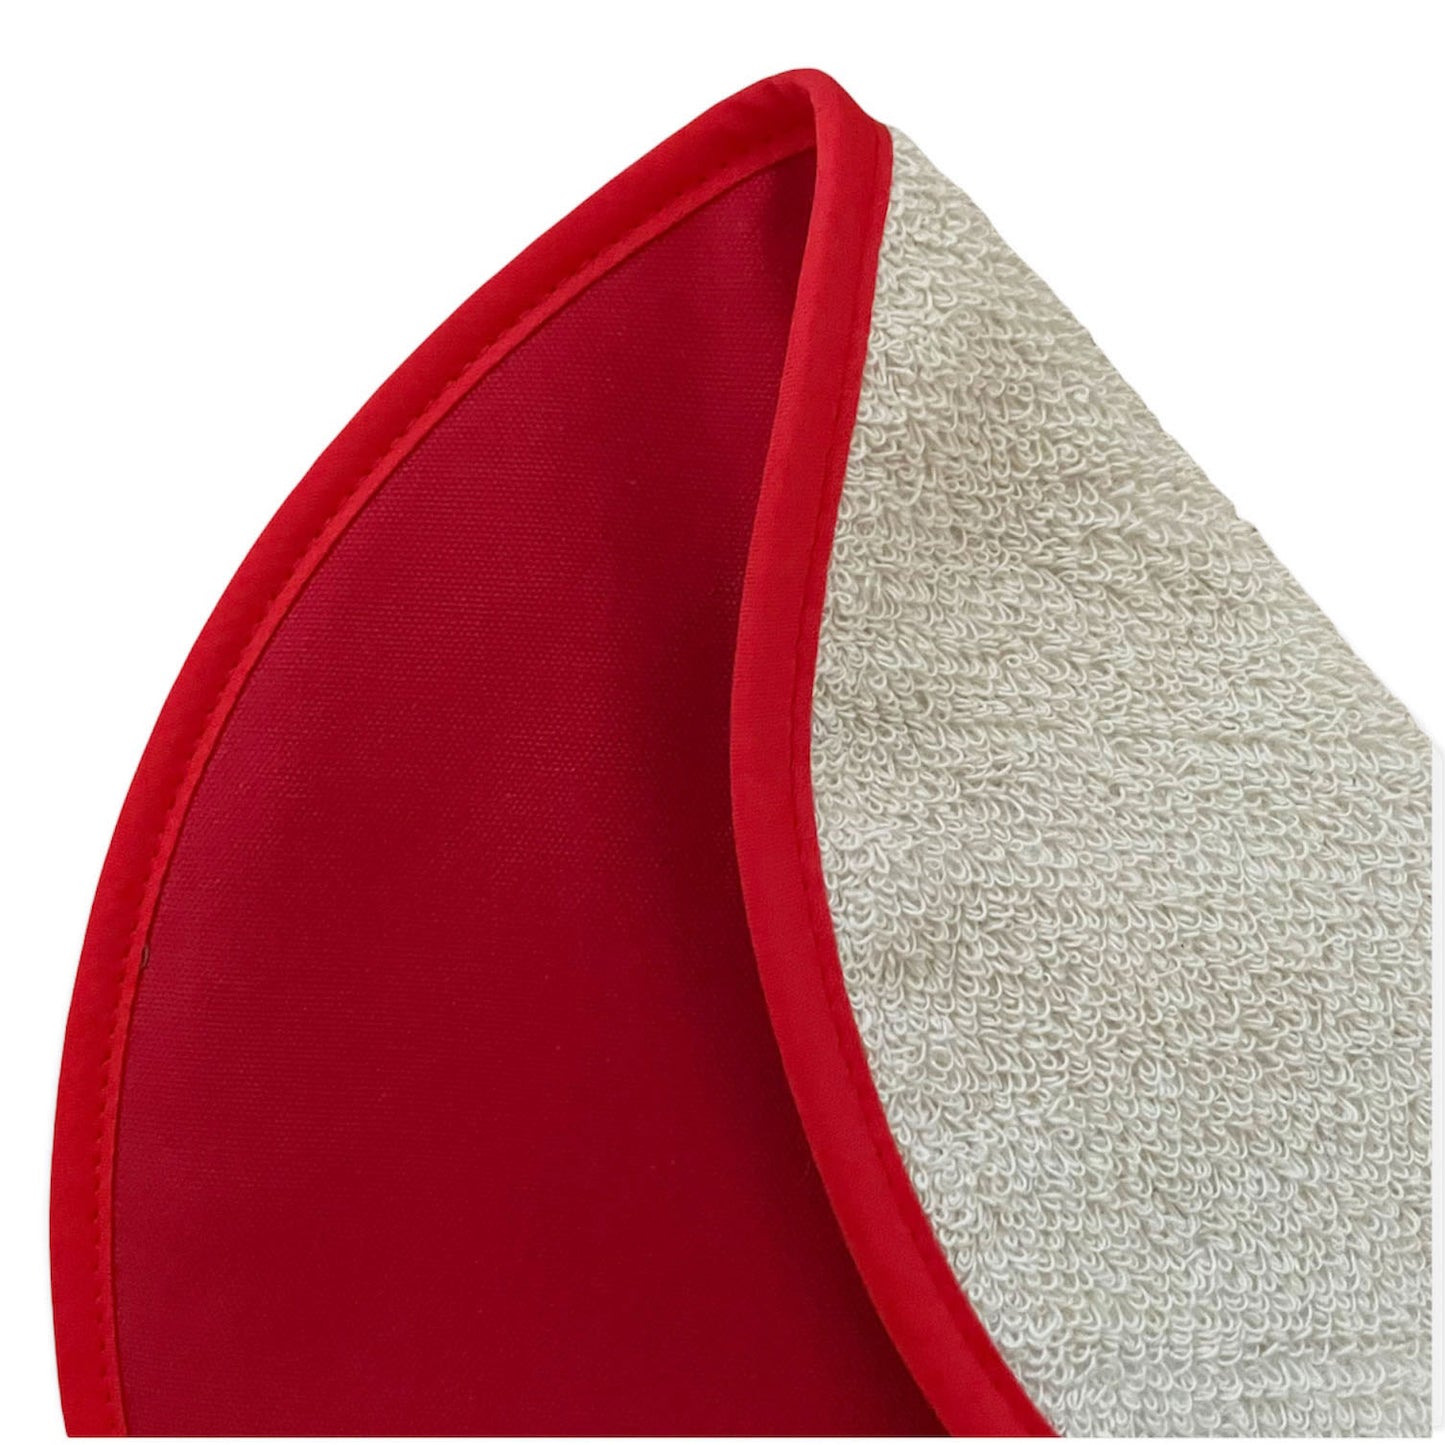 Chef Pad - Aga - The Chef Pad Shop - Plain Red Chef Pad for use with Aga Range Cookers